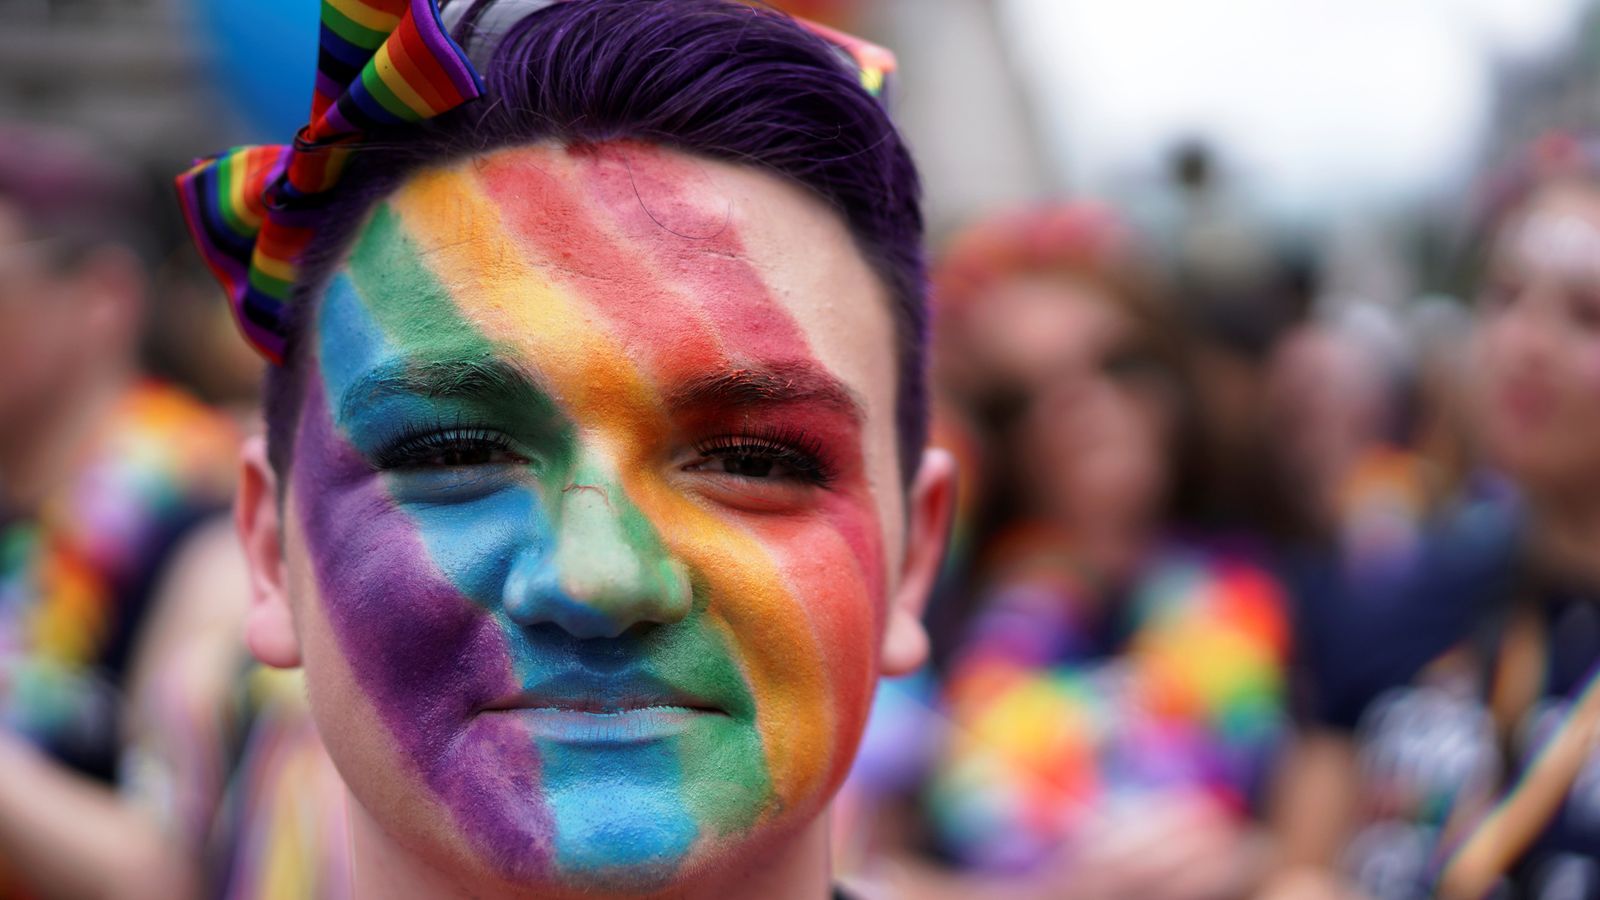 LGBTQ+ on display: We’ve occur a extensive way but there is certainly a lot more do the job to do | Ents & Arts Information